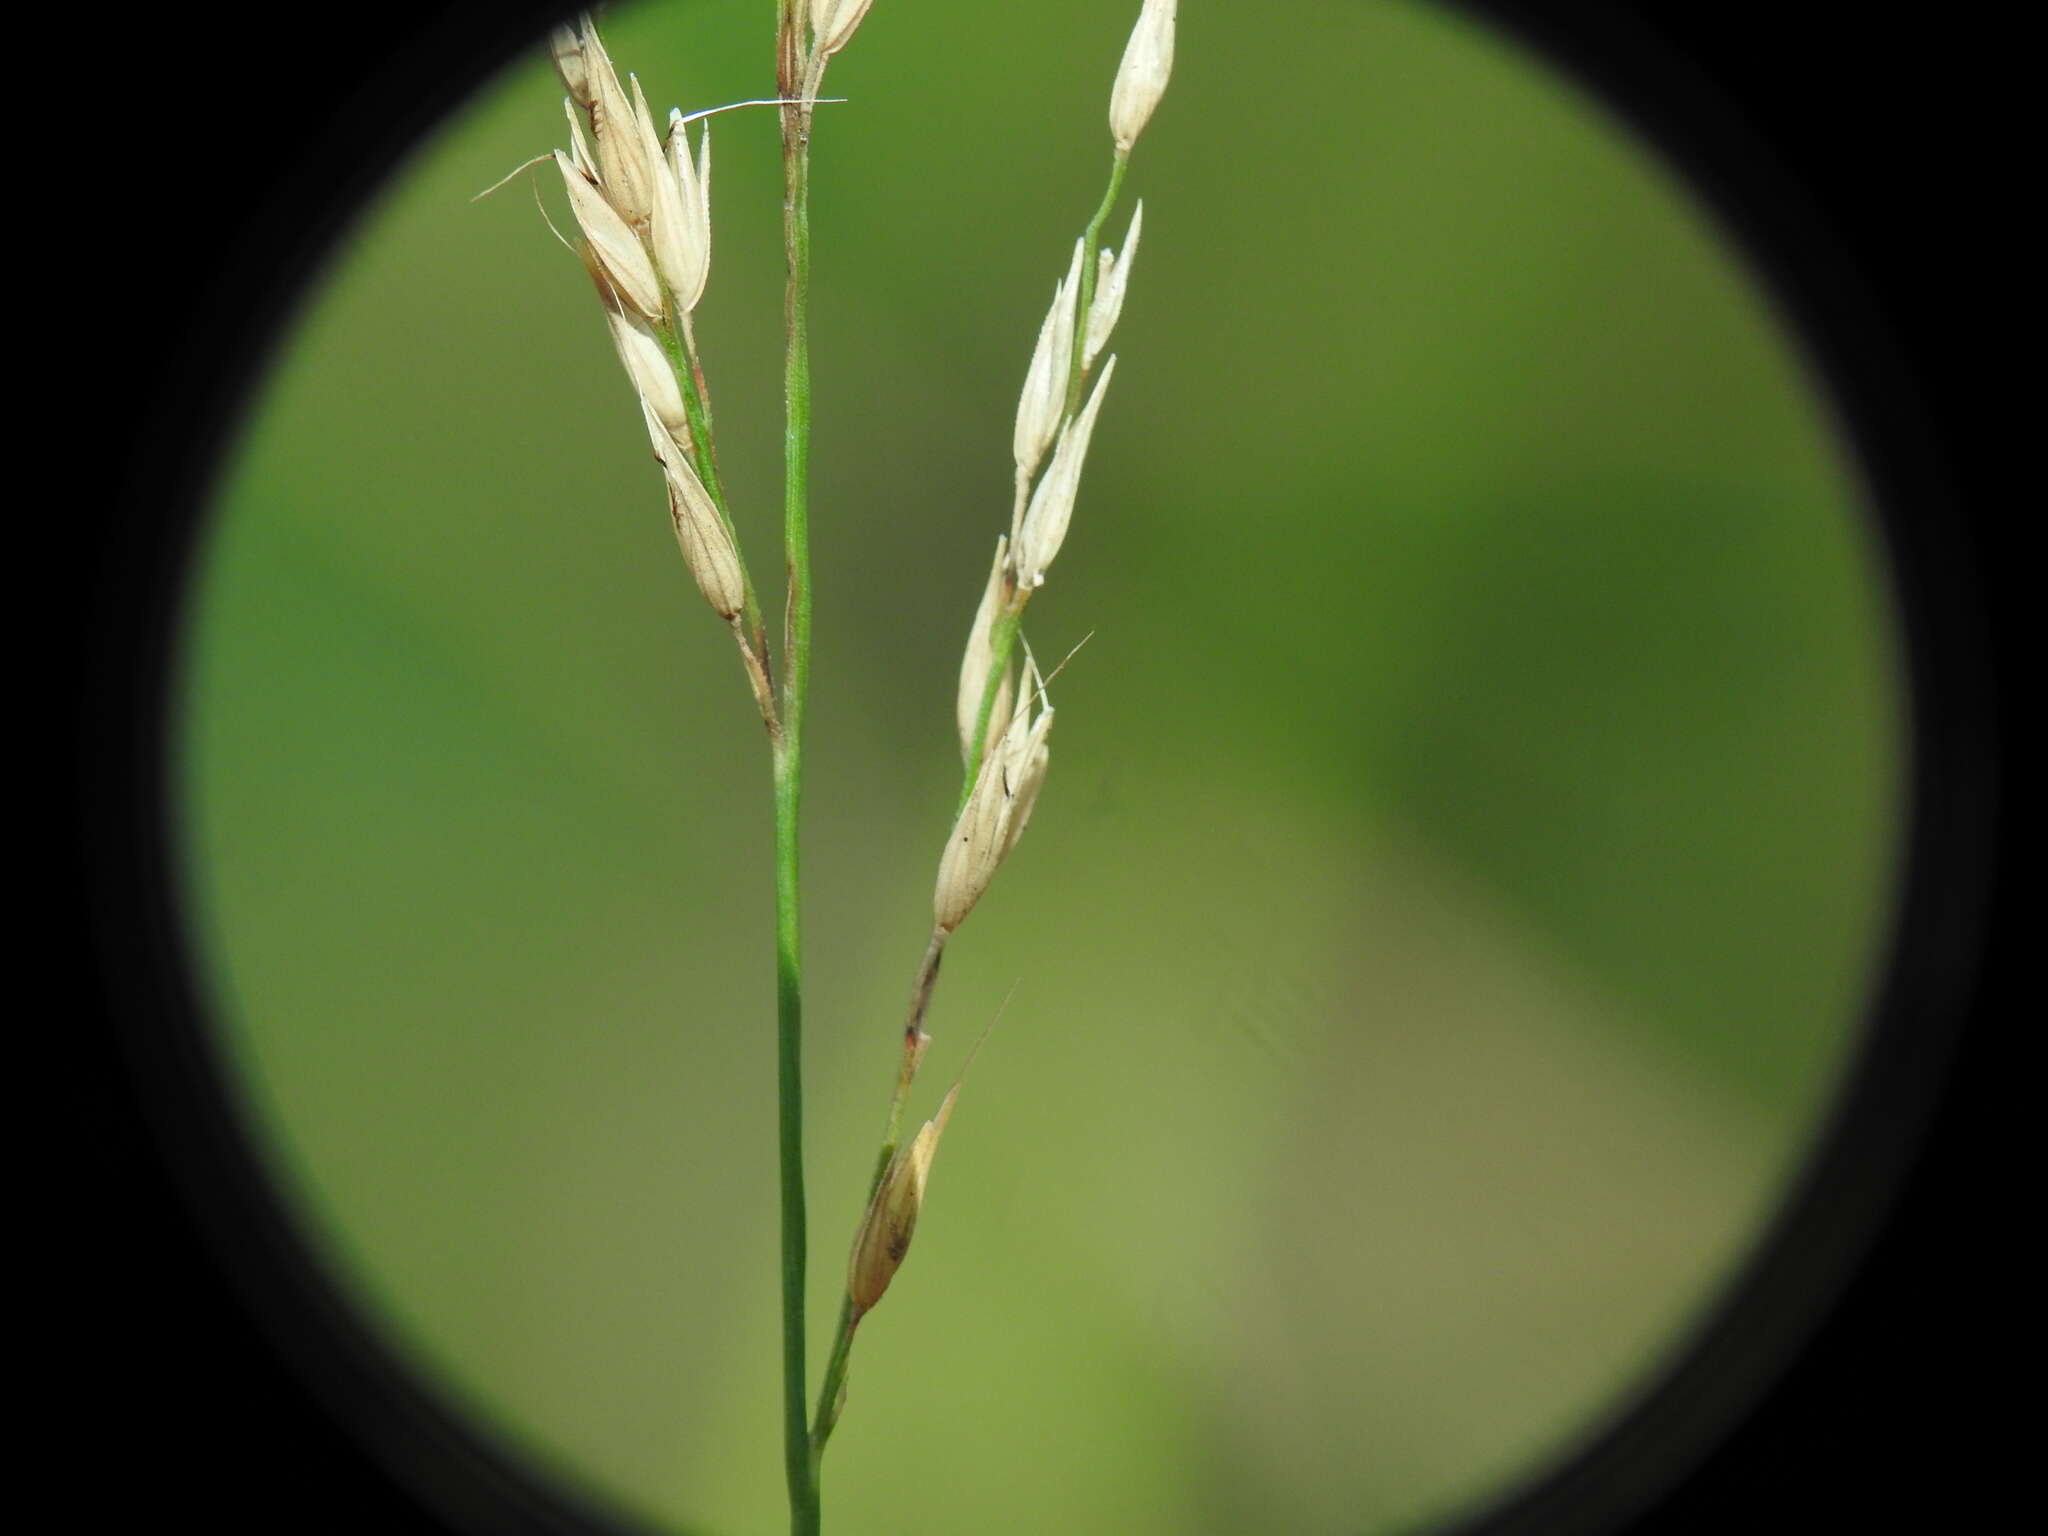 Image of River grass